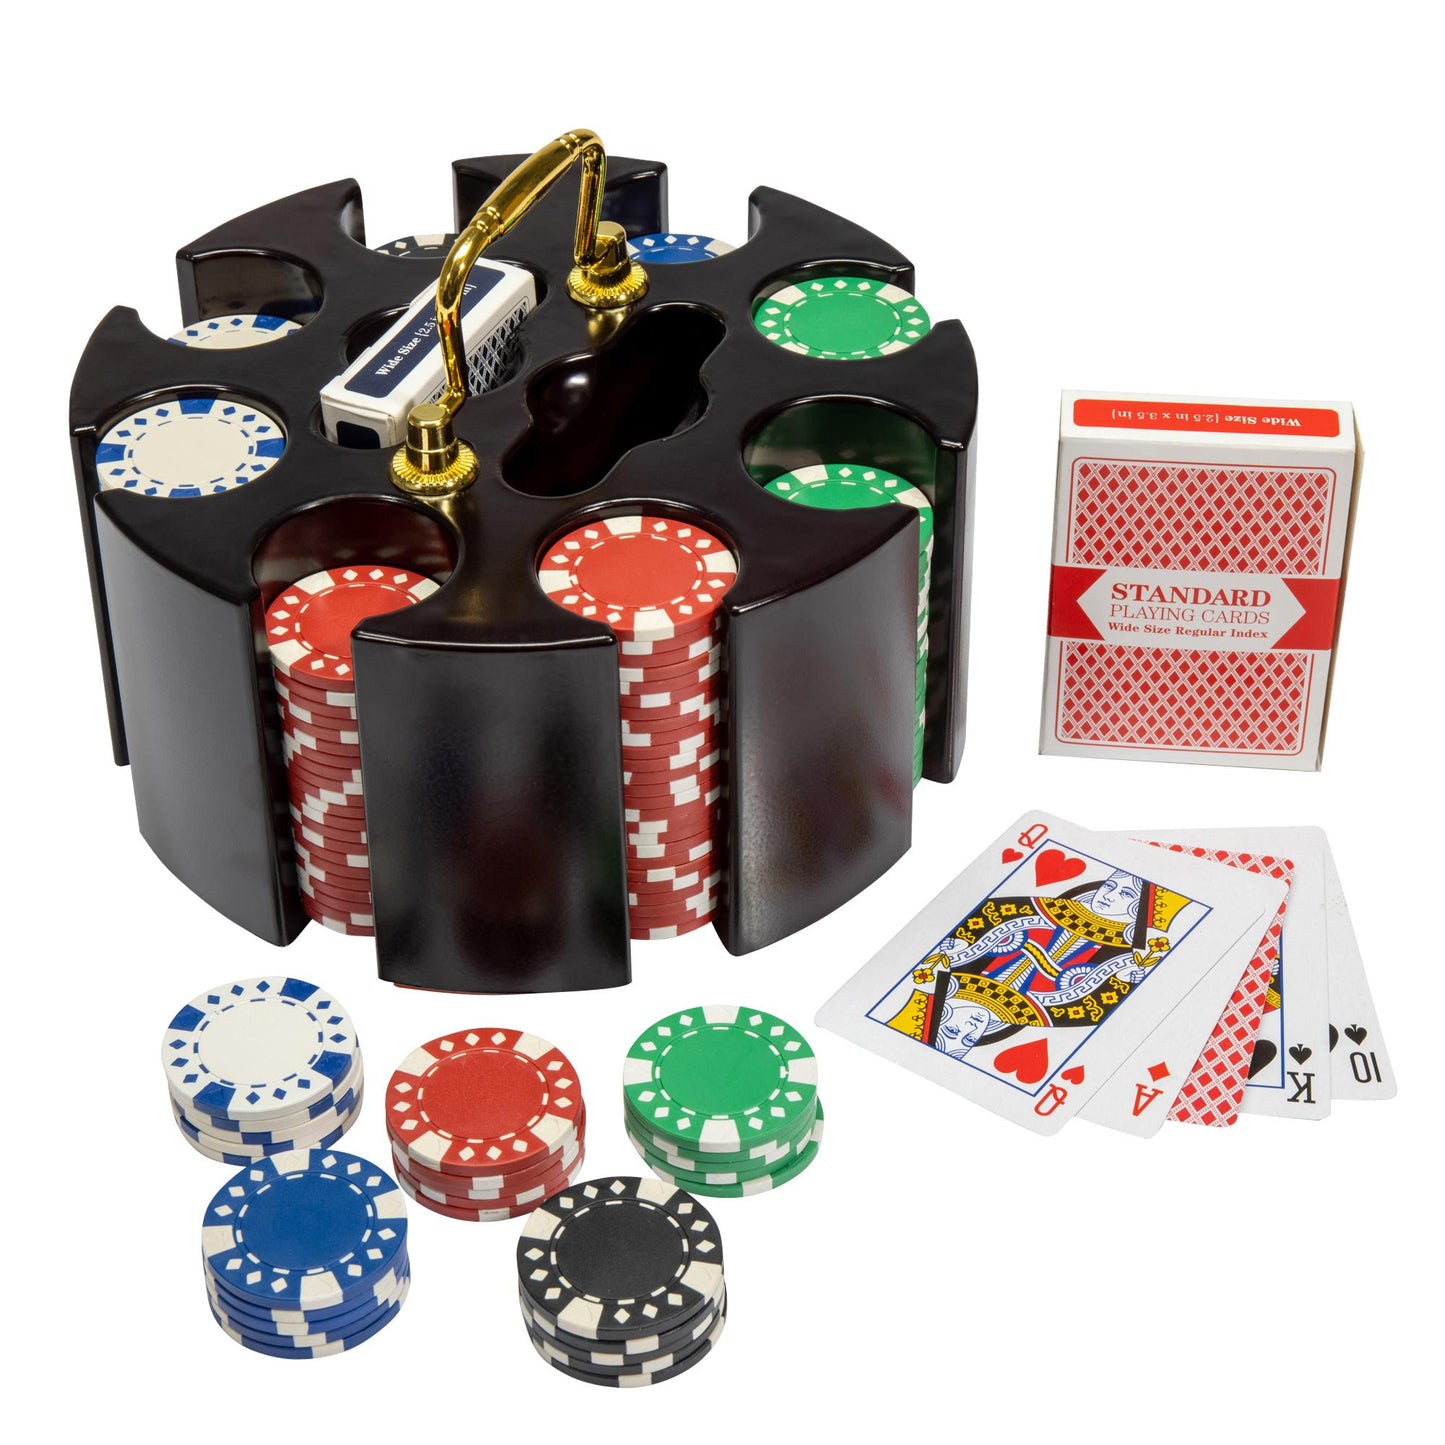 200 Diamond Suited Poker Chips with Wooden Carousel